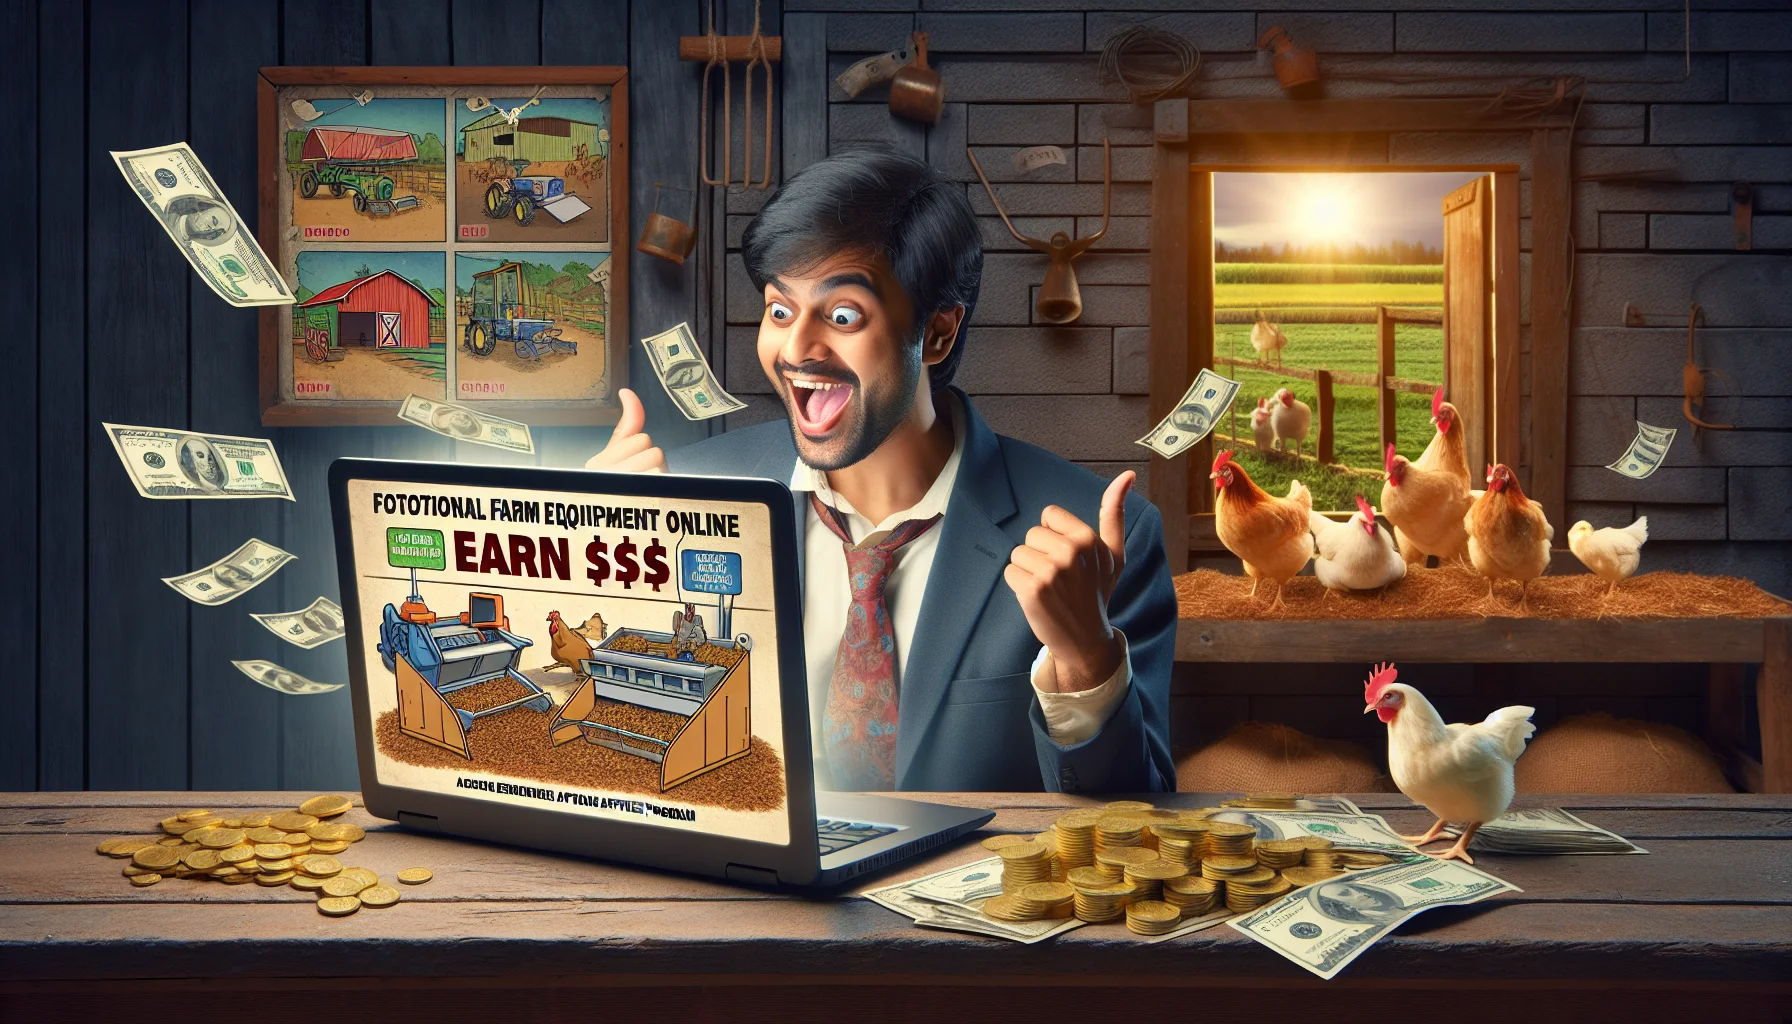 Envision a humorously exaggerated scene centered around promoting a fictional farm equipment affiliate program online. Picture an individual of South Asian descent, sitting at a rustic wooden desk, excitedly pointing at a brightly glowing laptop screen. The screen displays illustrations of various farming equipment with tags reading 'Earn $$$'. The backdrop consists of a homely farm, with chickens peering curiously through the window. Piles of gold coins and money bills are whimsically scattered across the desk, further adding to the enticing allure of making money online with this affiliate program.